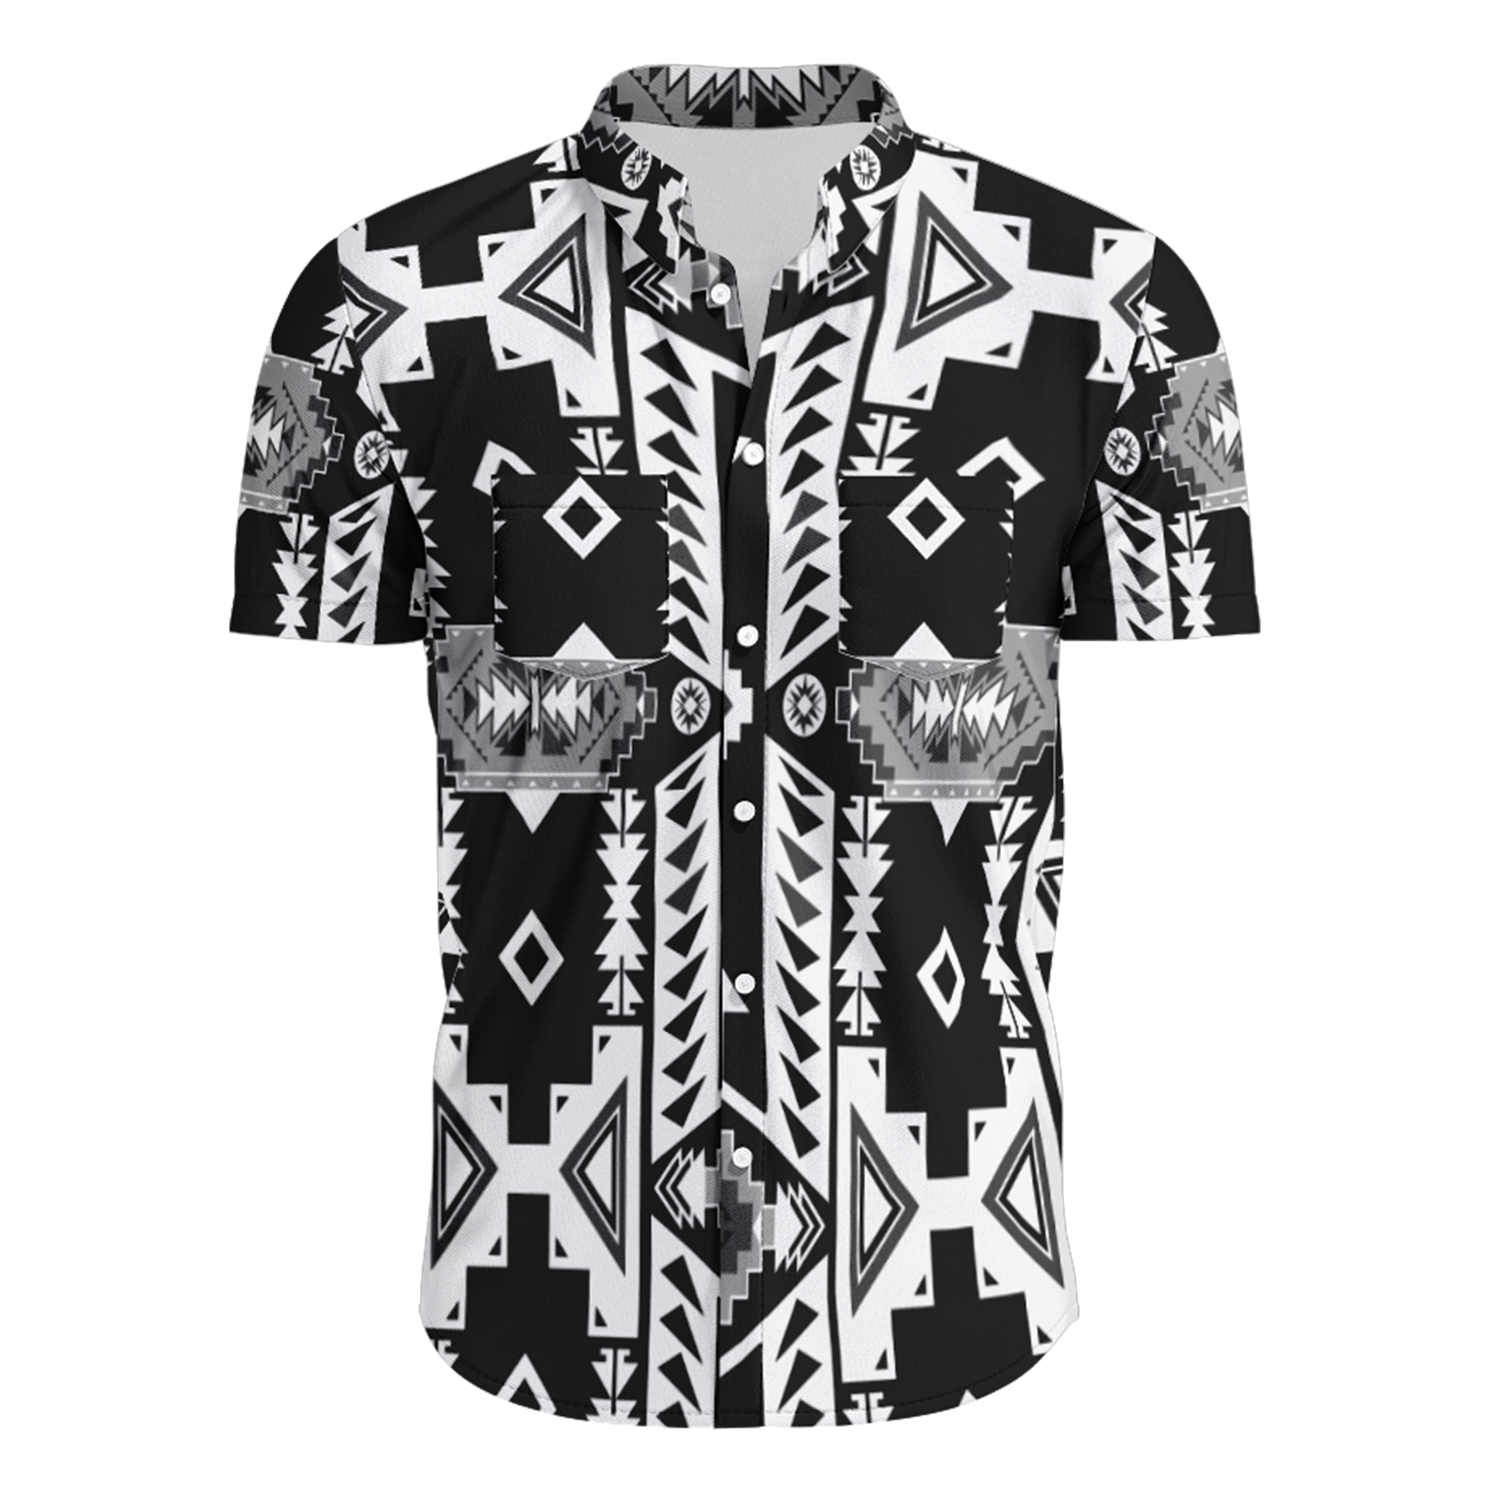 Men's Hawaiian-Style Button Up Shirt - Chiefs Mountain Black and White